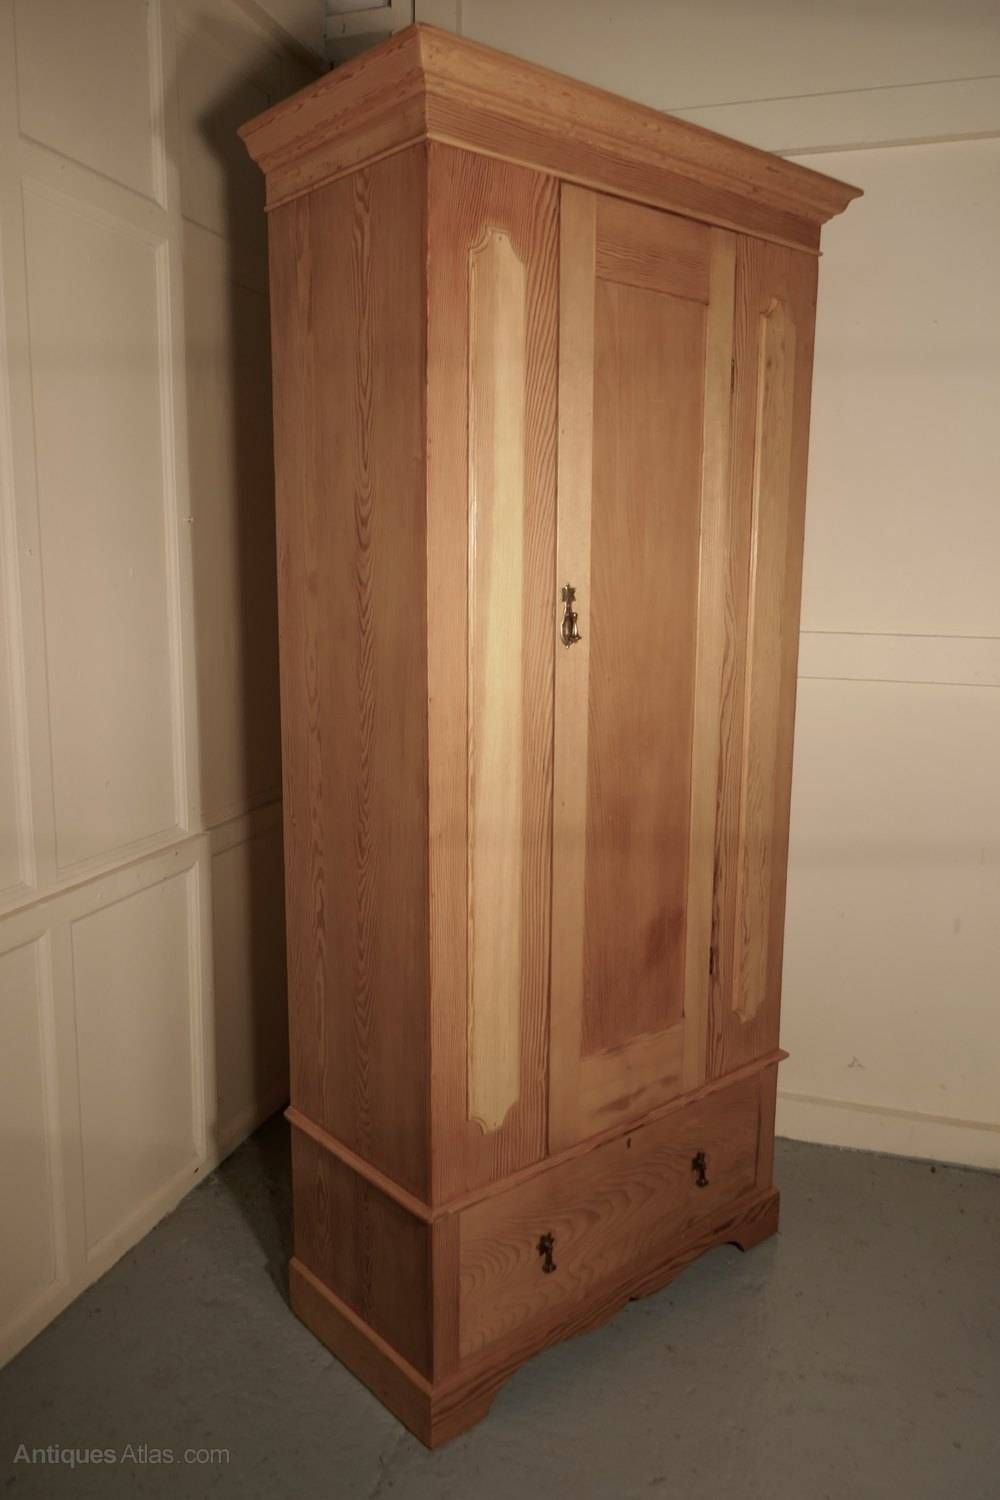 A Victorian Stripped Pine Wardrobe – Antiques Atlas Intended For Victorian Pine Wardrobes (View 14 of 15)